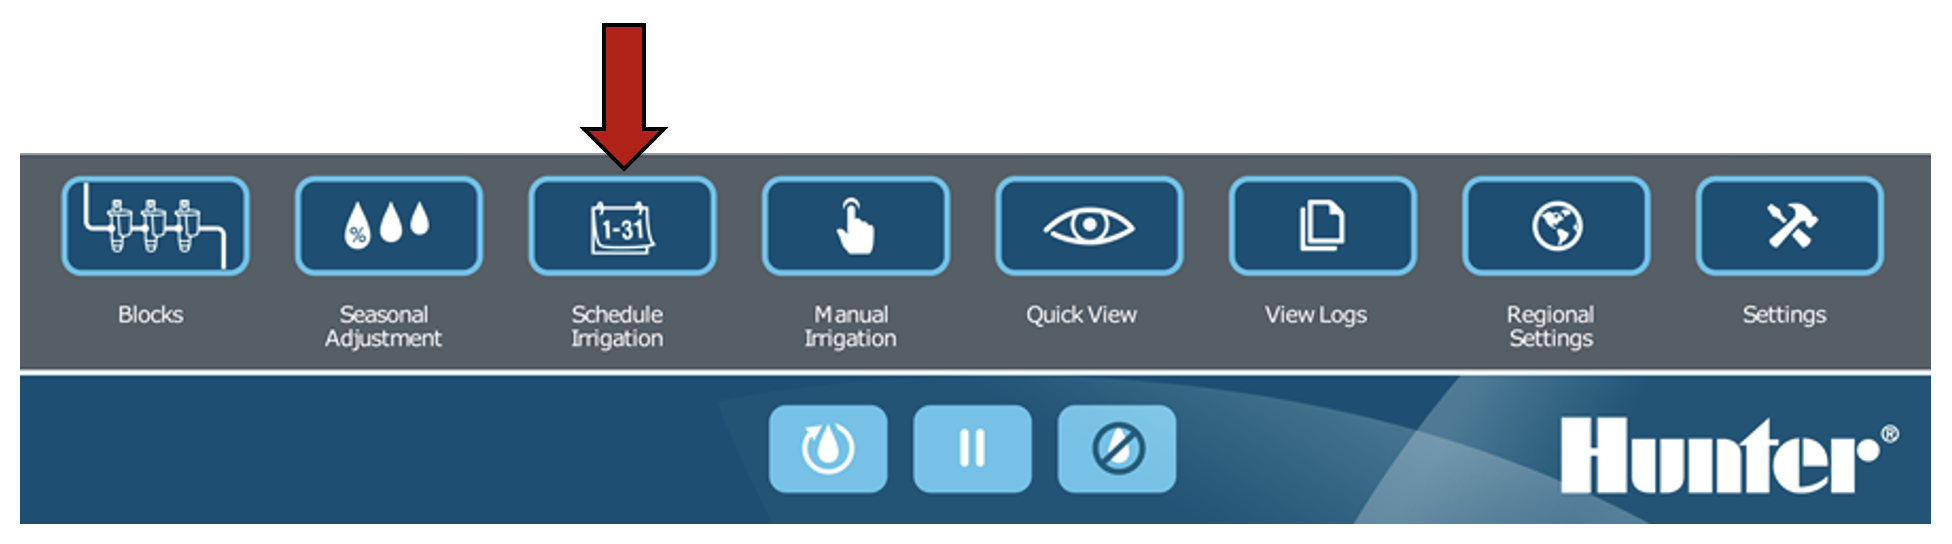 Image highlighting the Schedule Irrigation button.